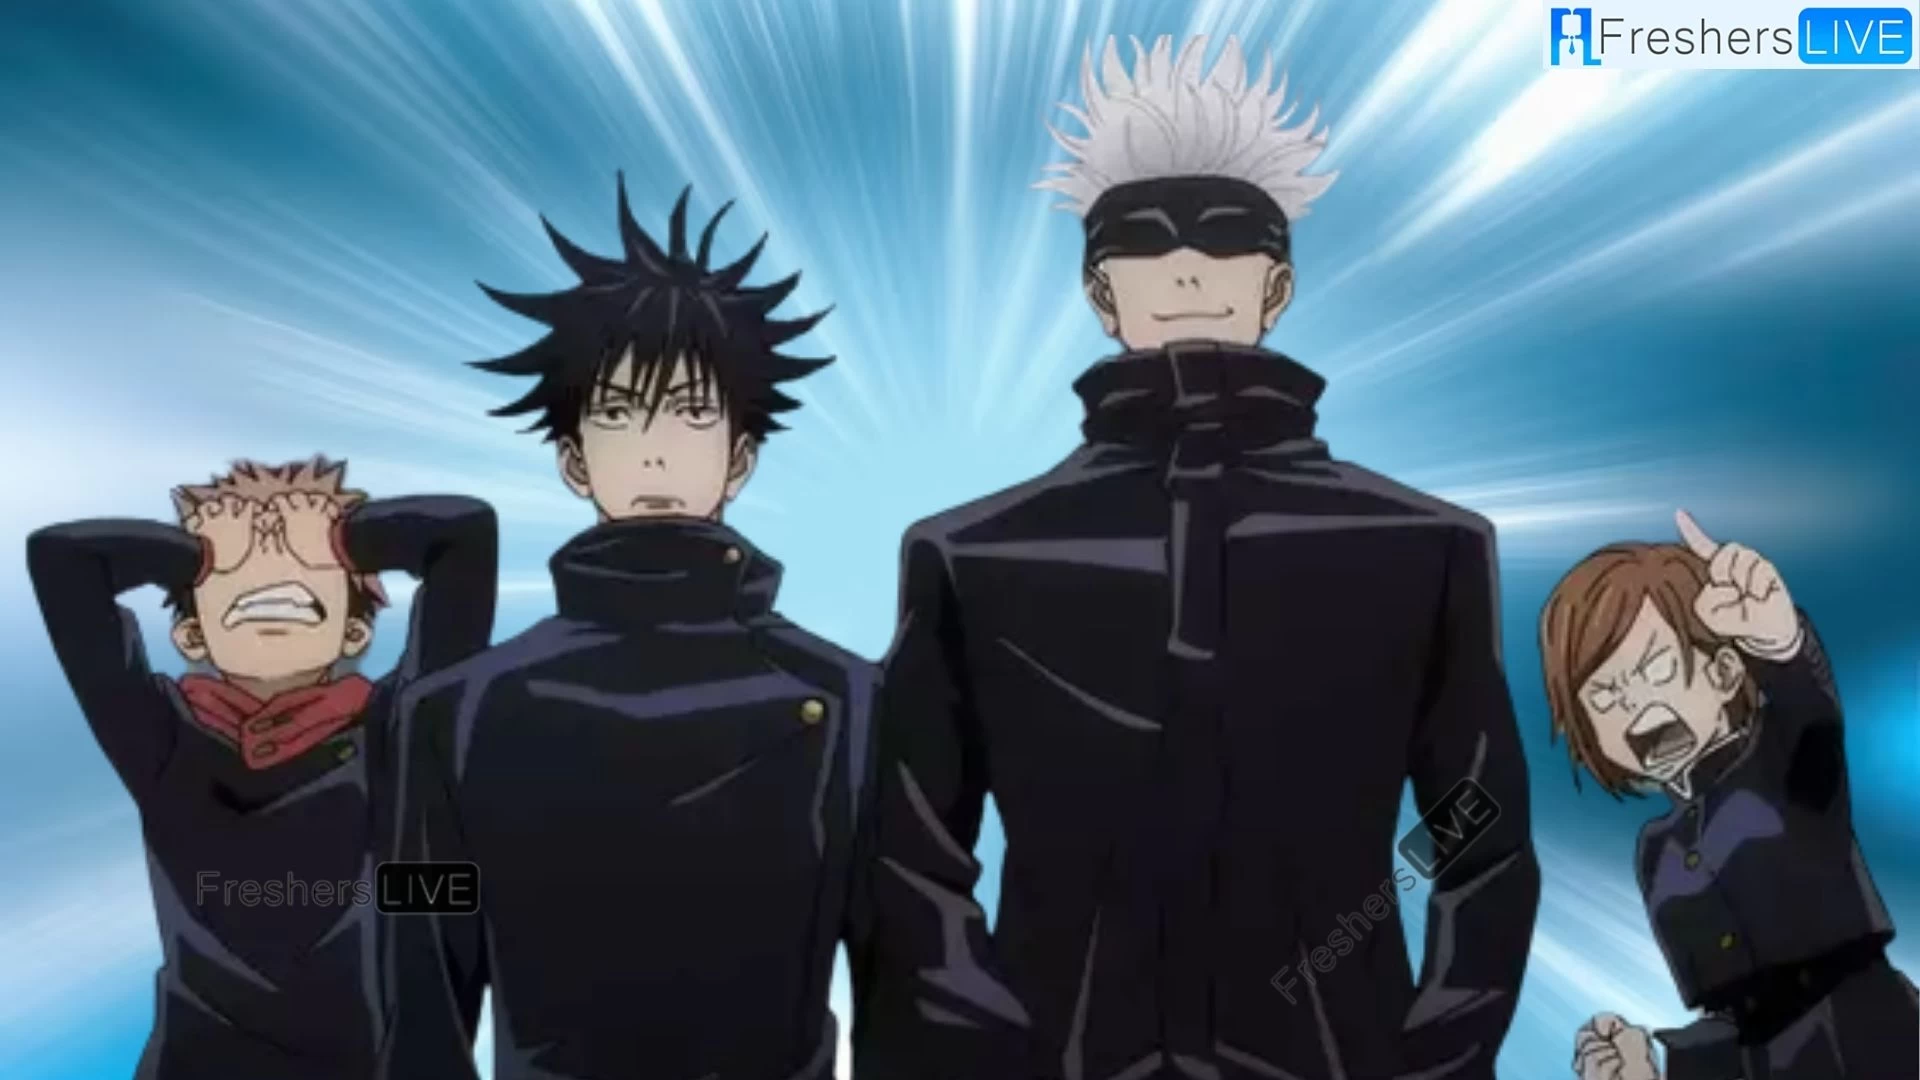 Jujutsu Kaisen Season 2 Episode 10 Ending Explained, Release Date, Cast, Plot, Review, Where to Watch and More